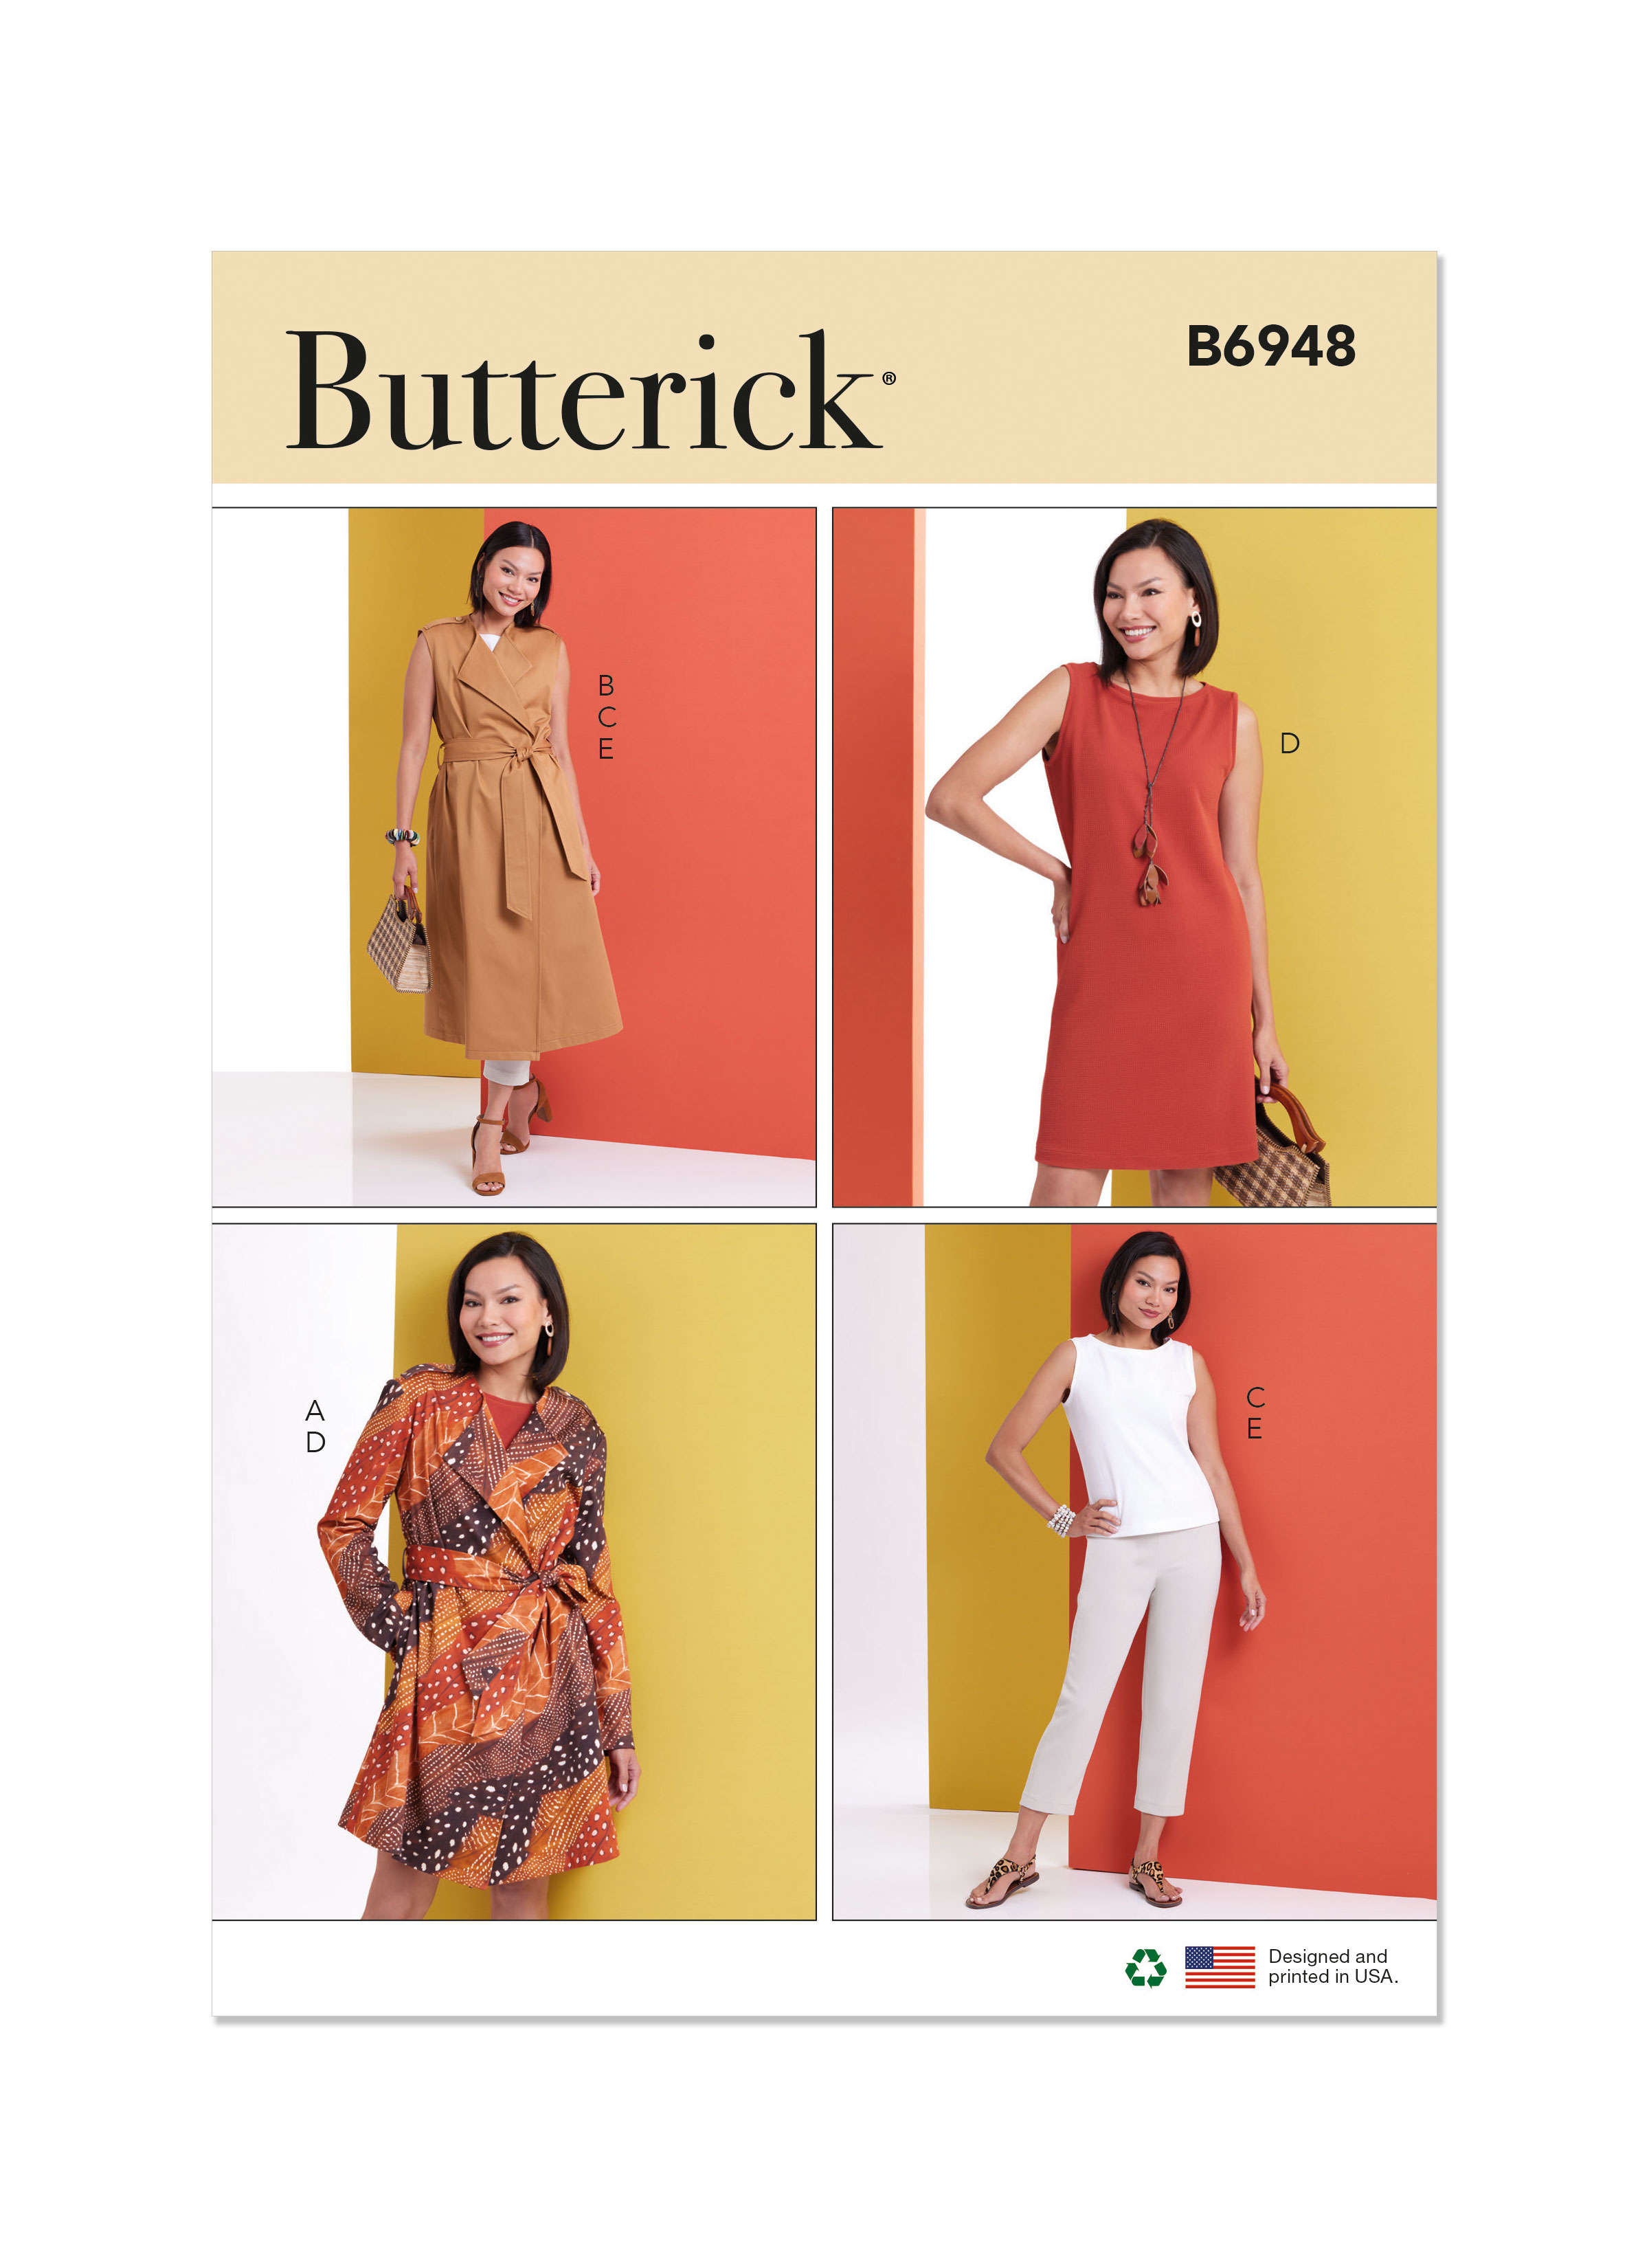 Butterick 6948 Misses' Jacket and Vest with Belt, Top, Dress and Pant